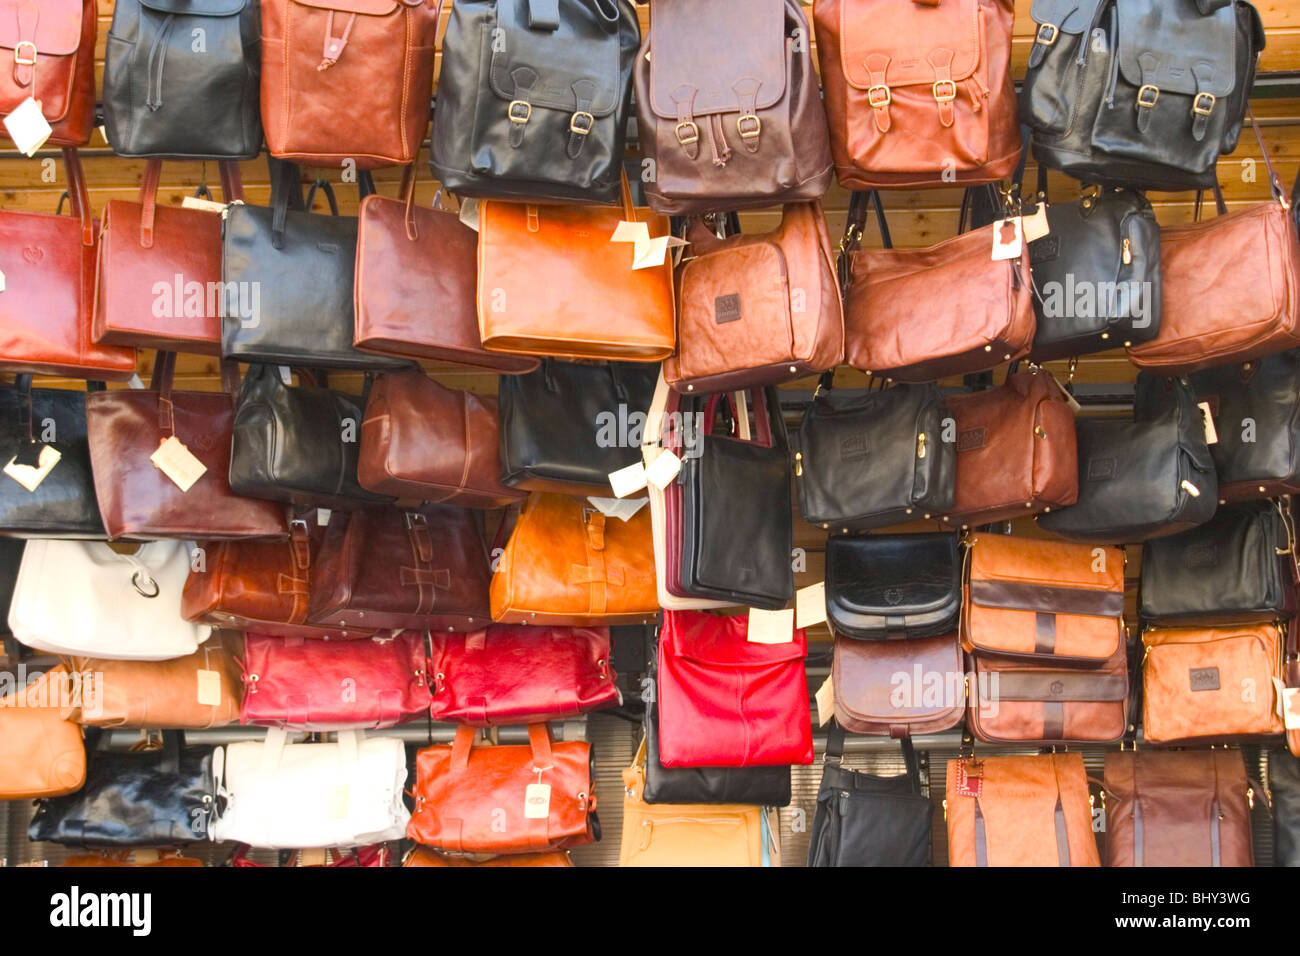 Turkey, Istanbul, 14,03,2018 Shoes And Handbags Of The Same Color In The  Shop Window Stock Photo, Picture and Royalty Free Image. Image 138050840.